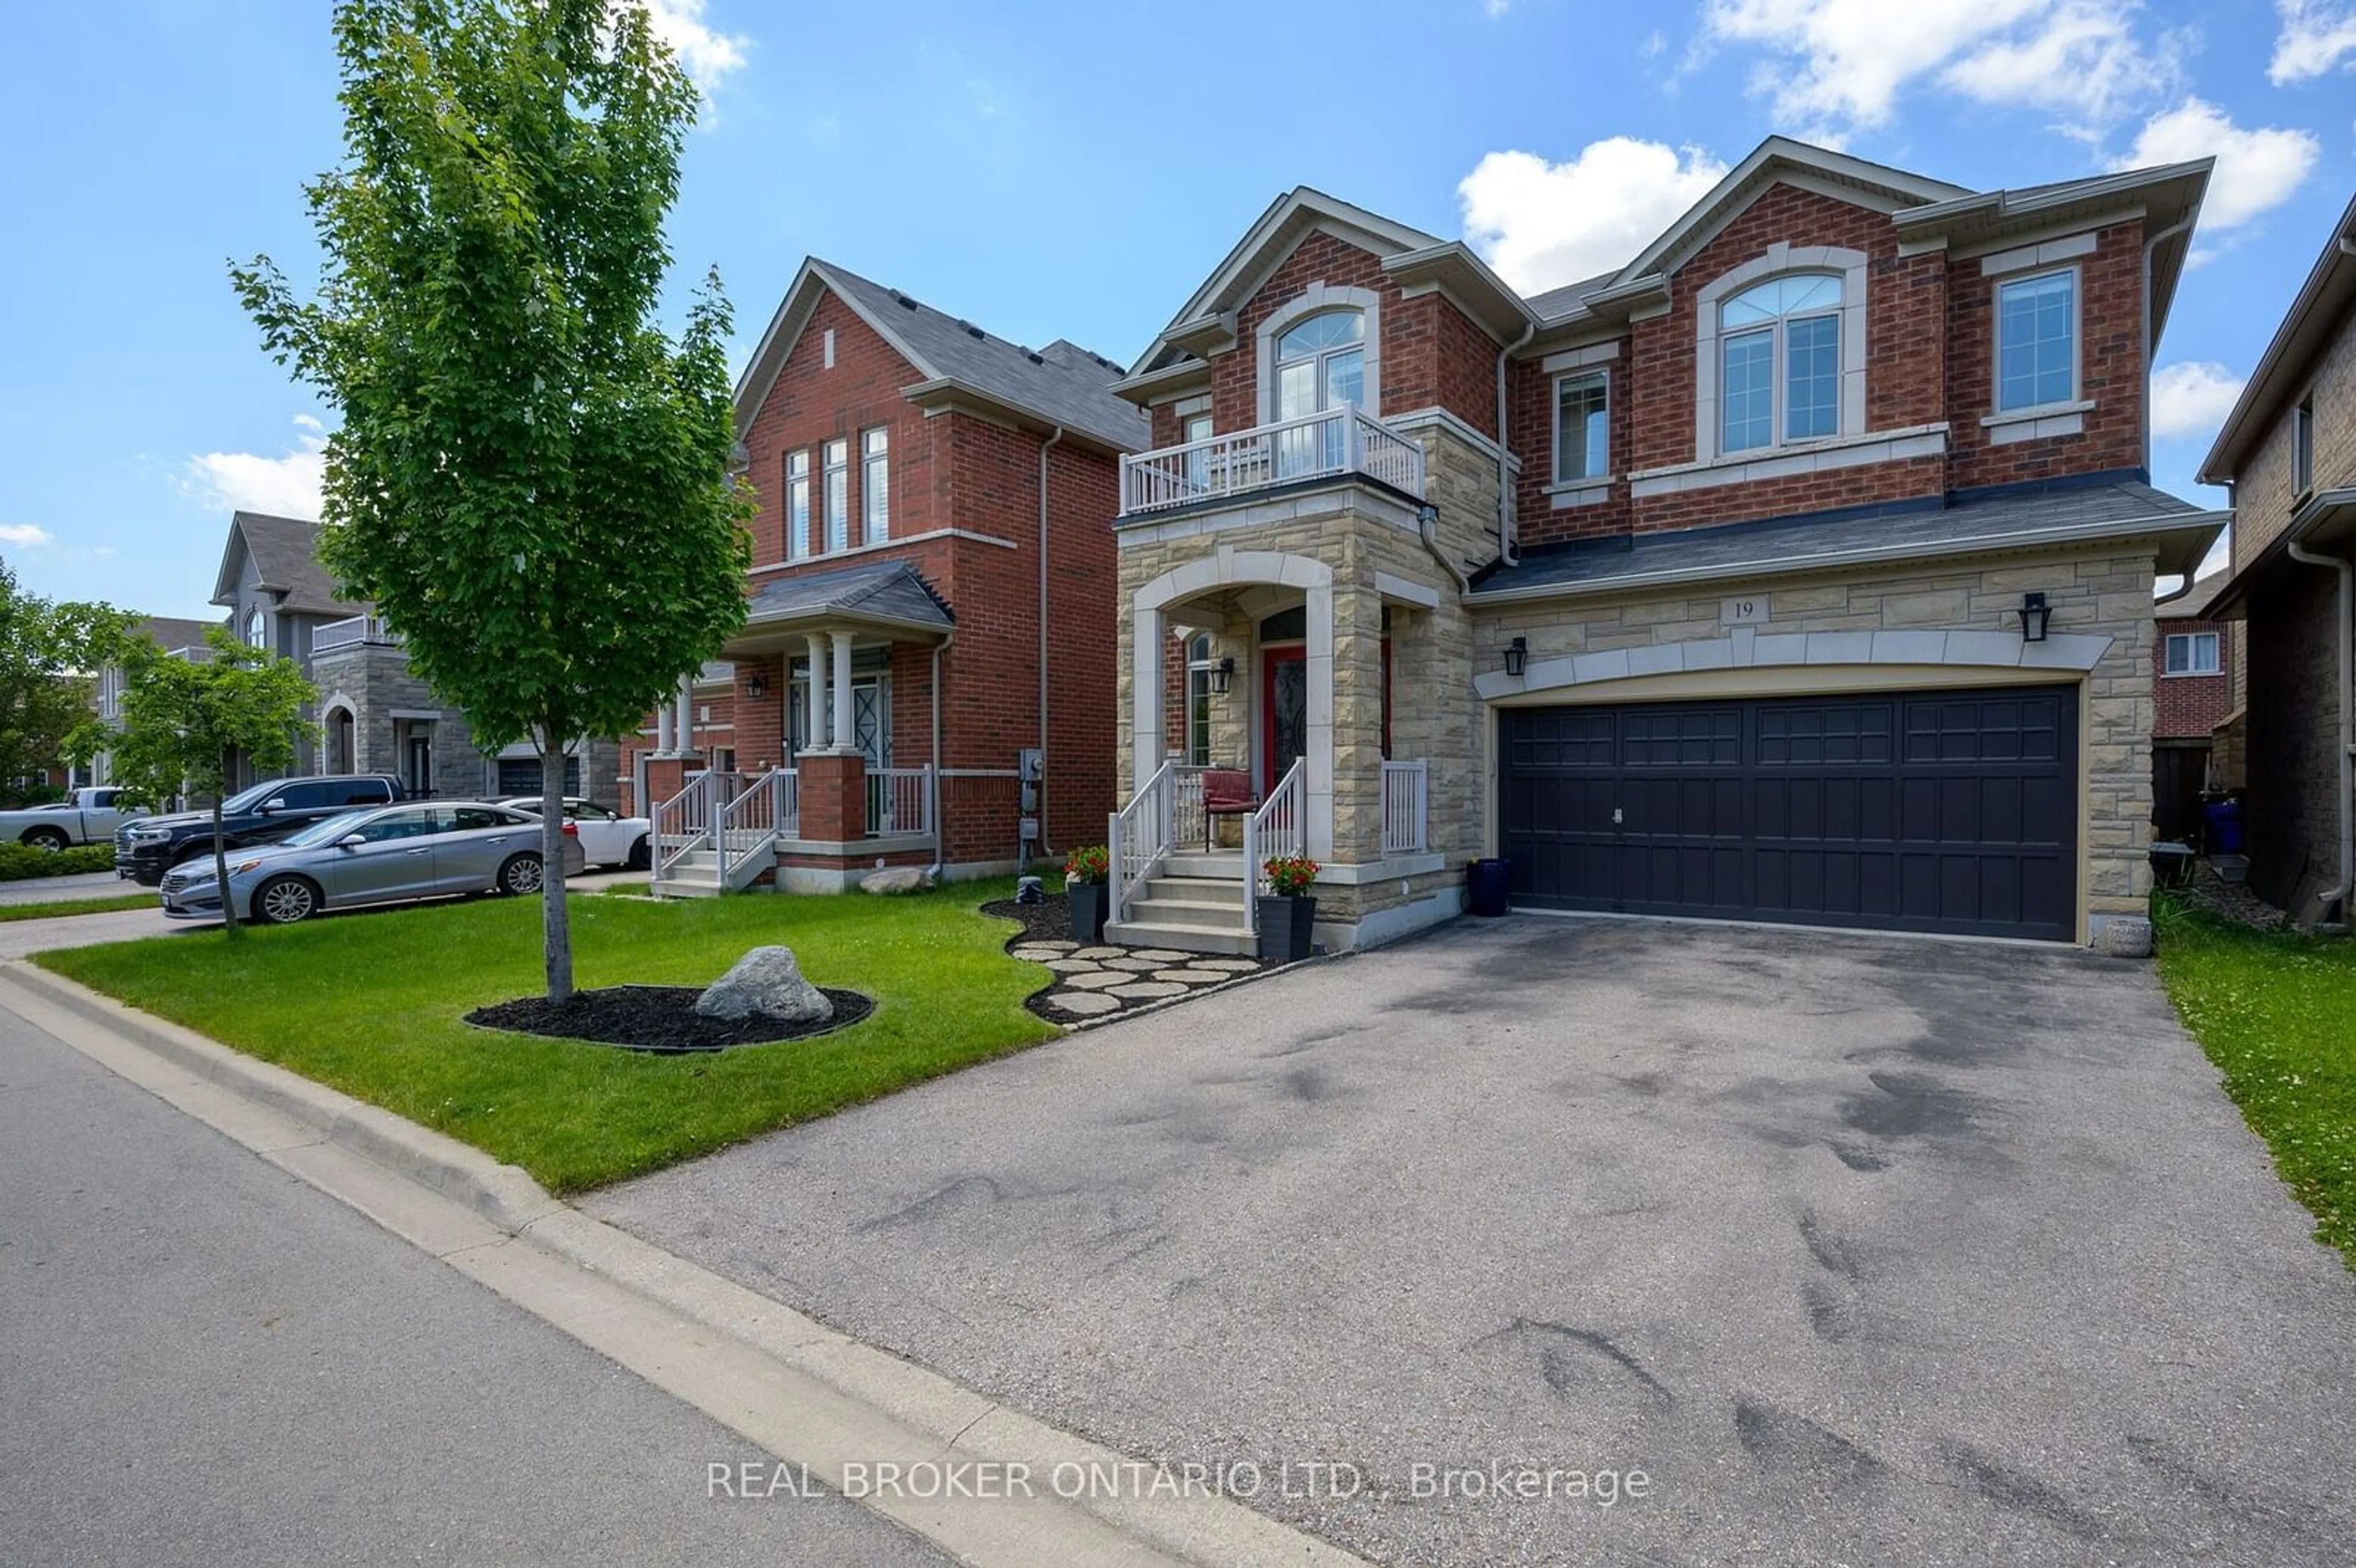 Home with brick exterior material for 19 Humphrey St, Hamilton Ontario L0R 2H7